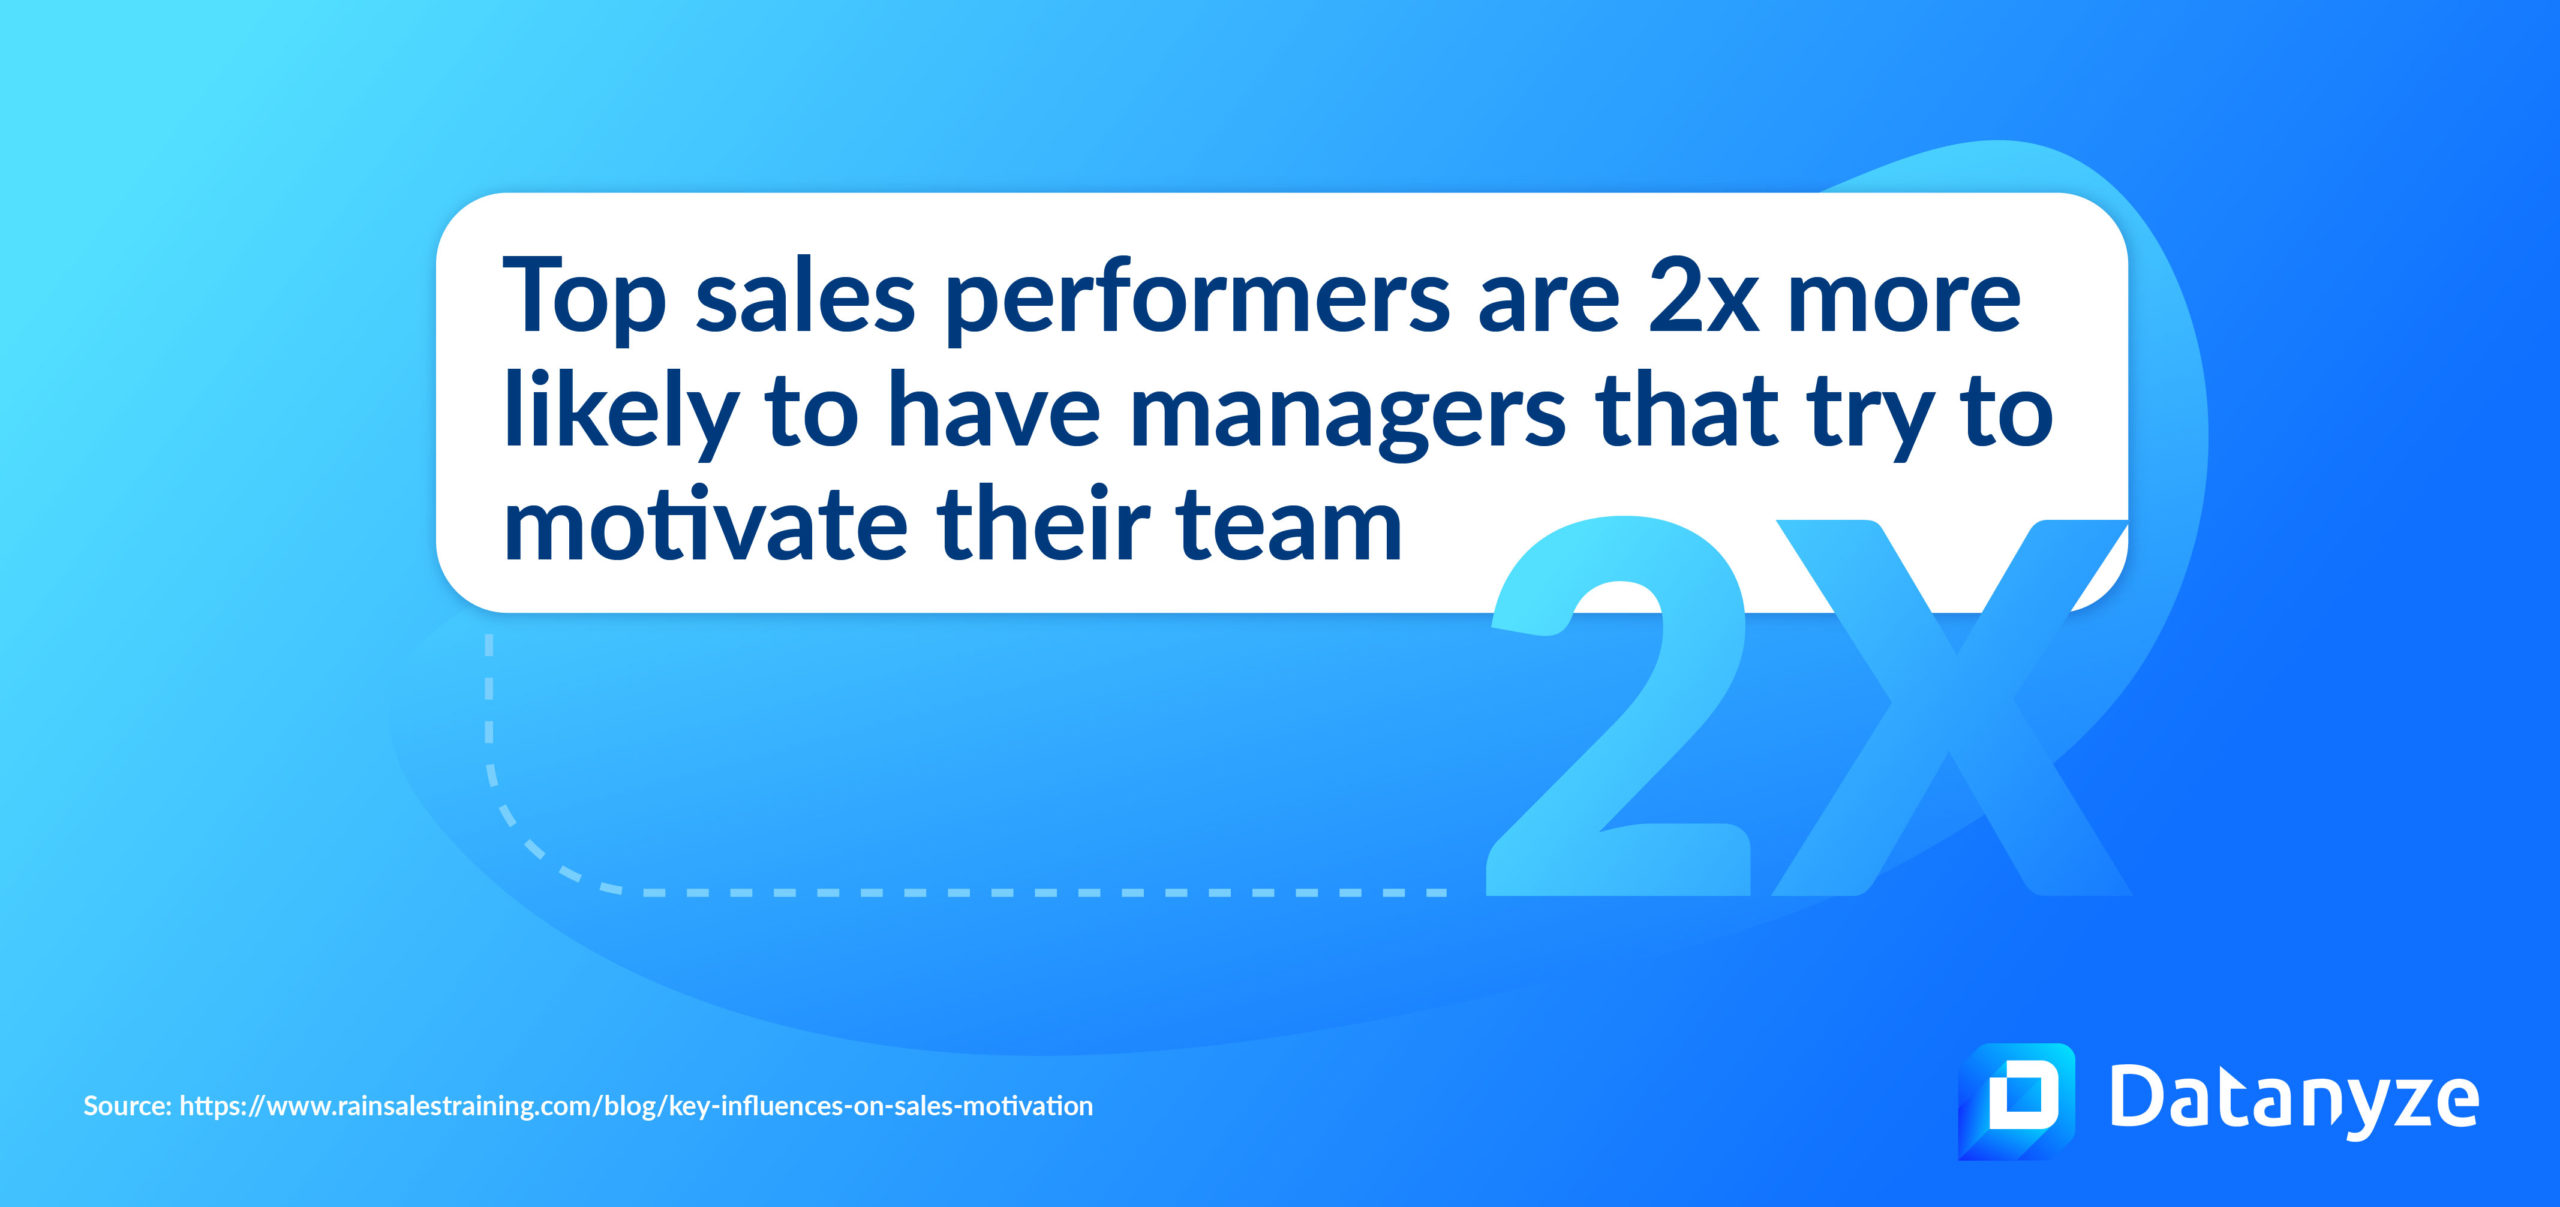 Stat: Top sales performers are 2 times more likely to have managers that try to motivate their team